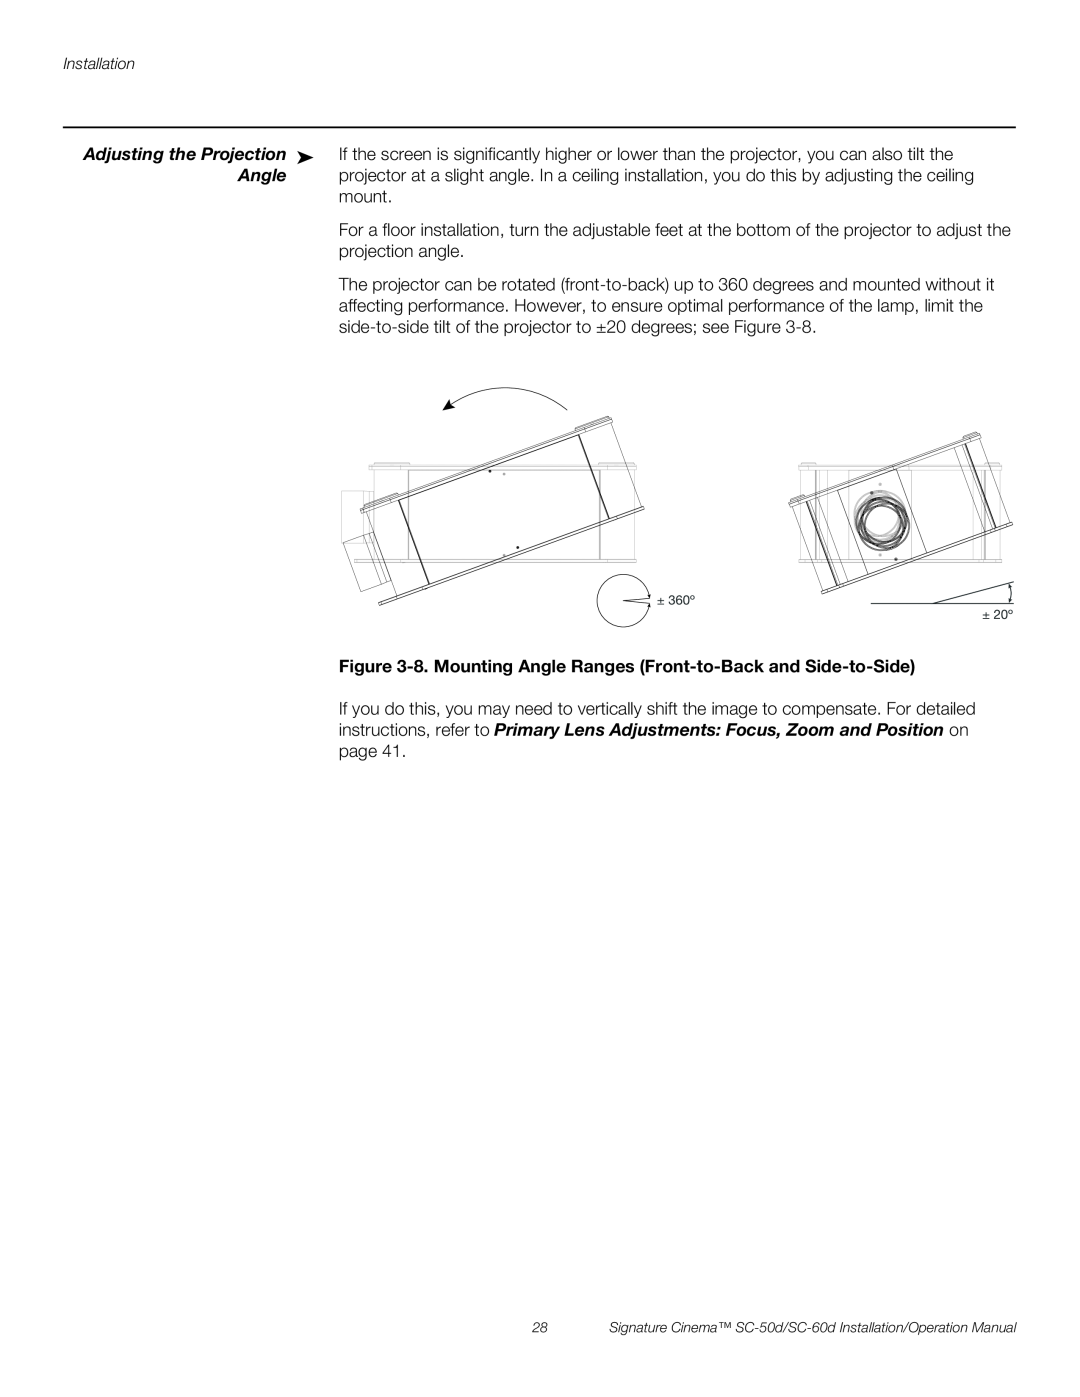 Runco SC-60D, SC-50D operation manual Adjusting the Projection, Angle 